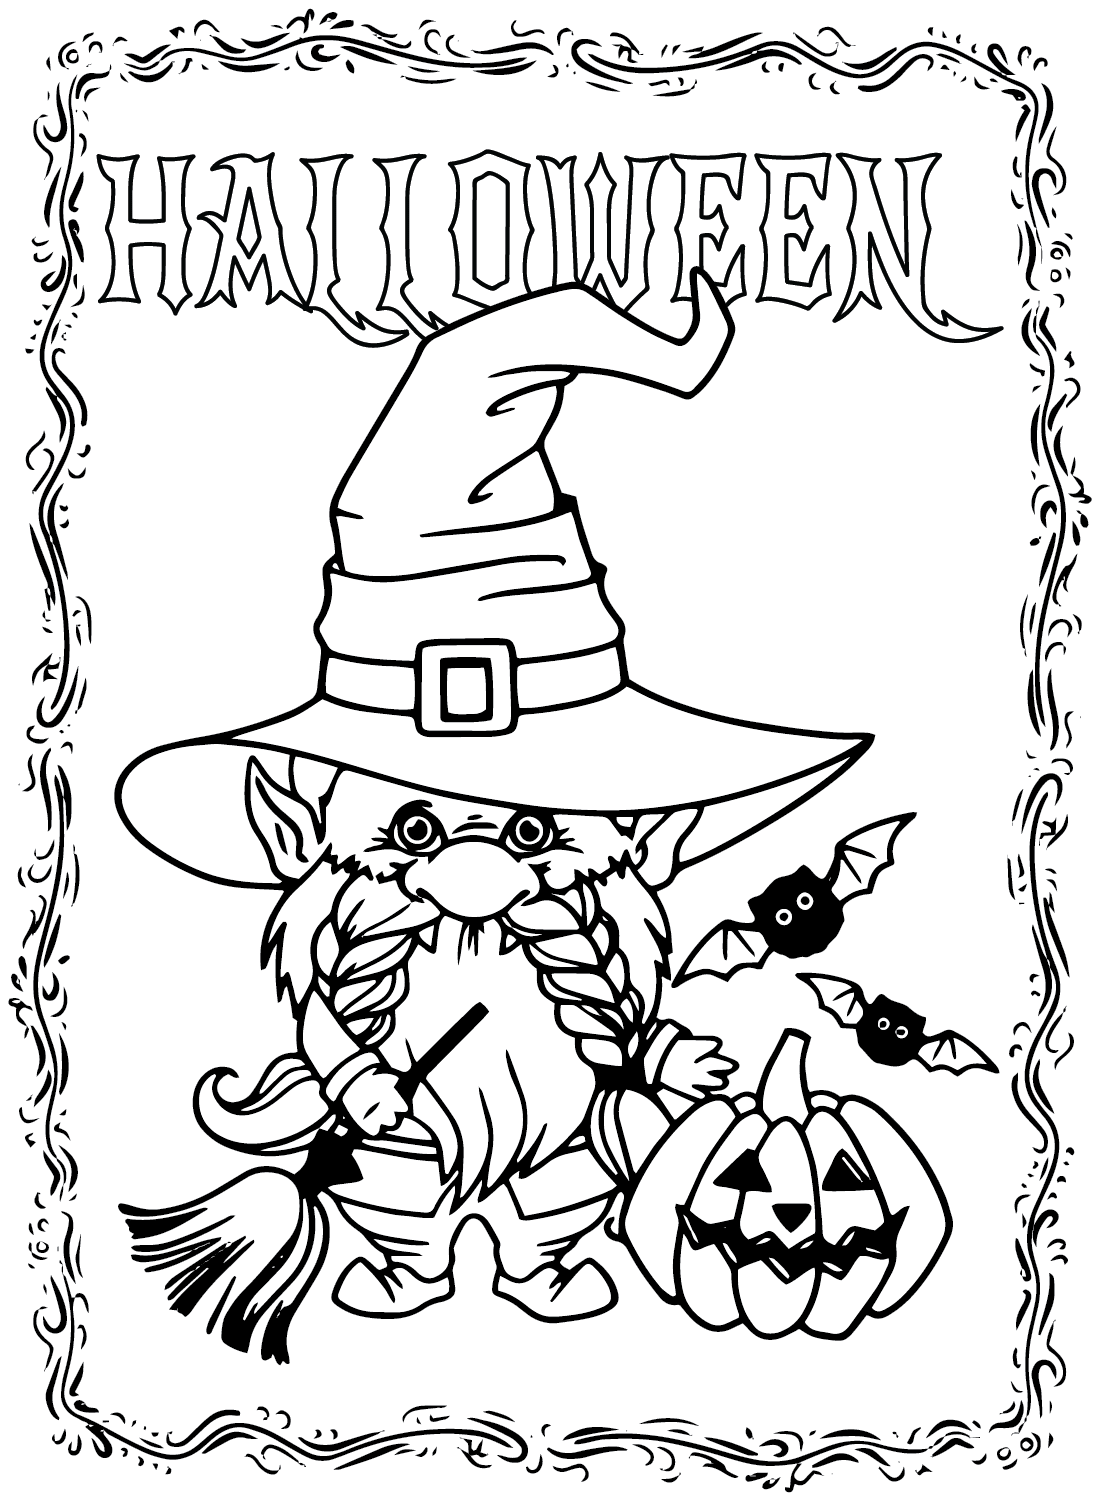 Coloring Sheet Halloween Cards from Halloween Cards